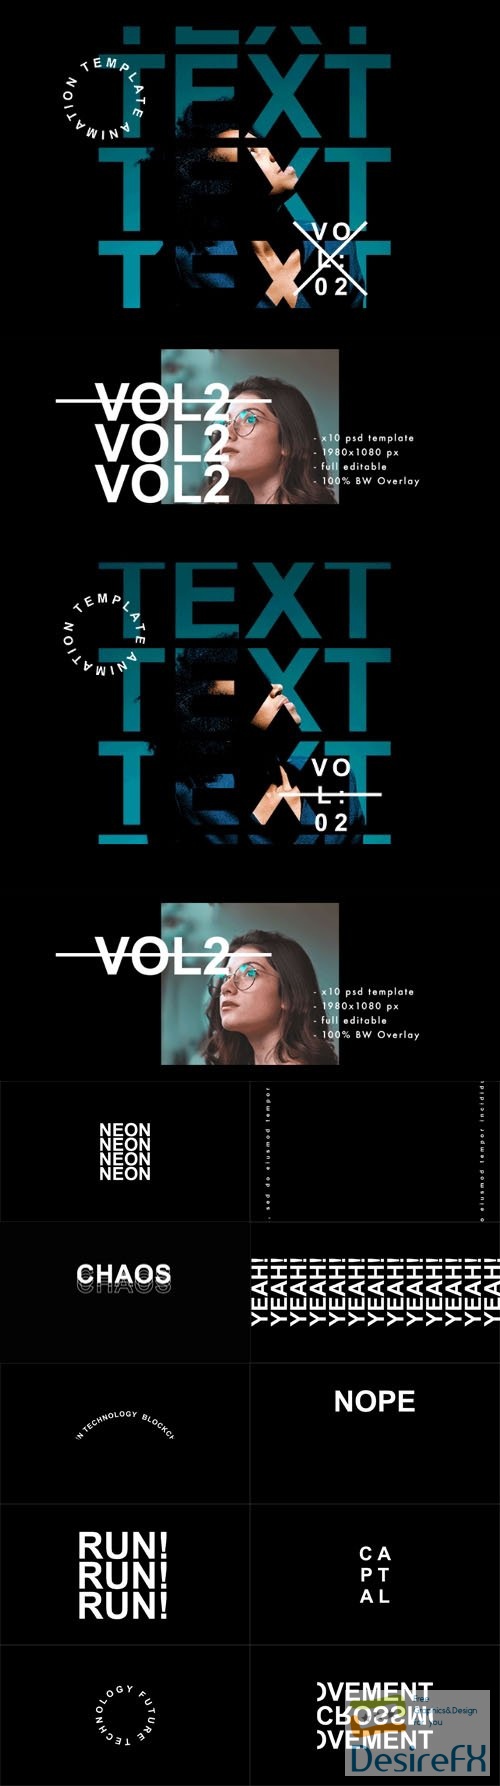 10 Text Animated Templates for Photoshop + Footages